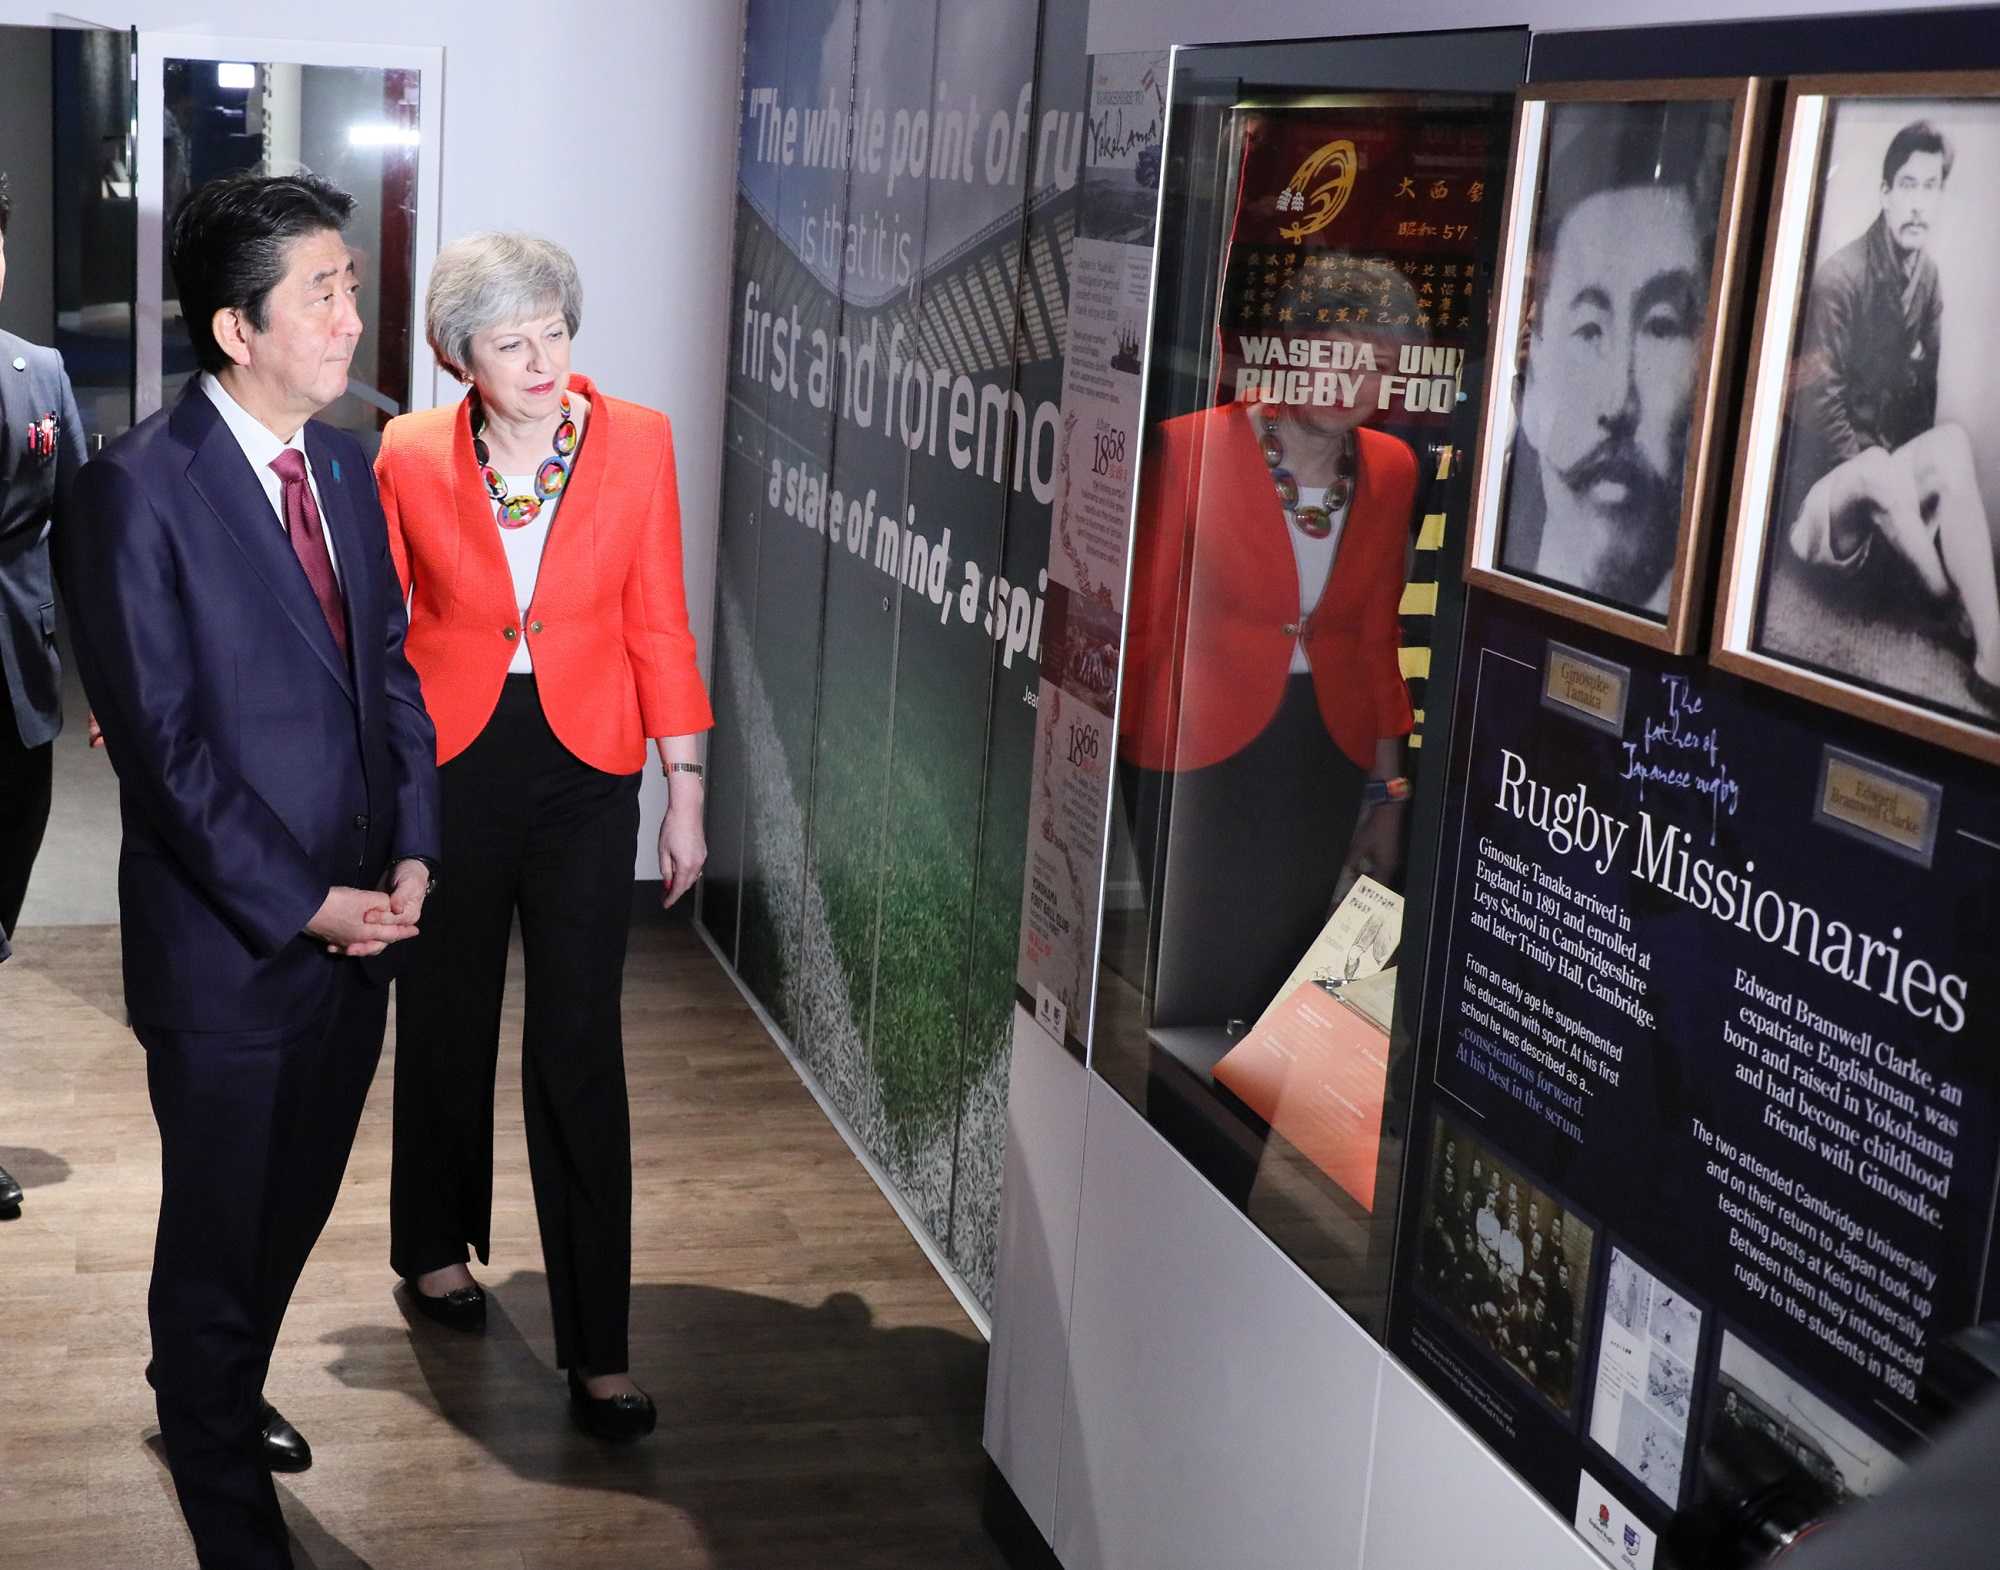 Photograph of the Prime Minister visiting the special exhibition on Japanese rugby